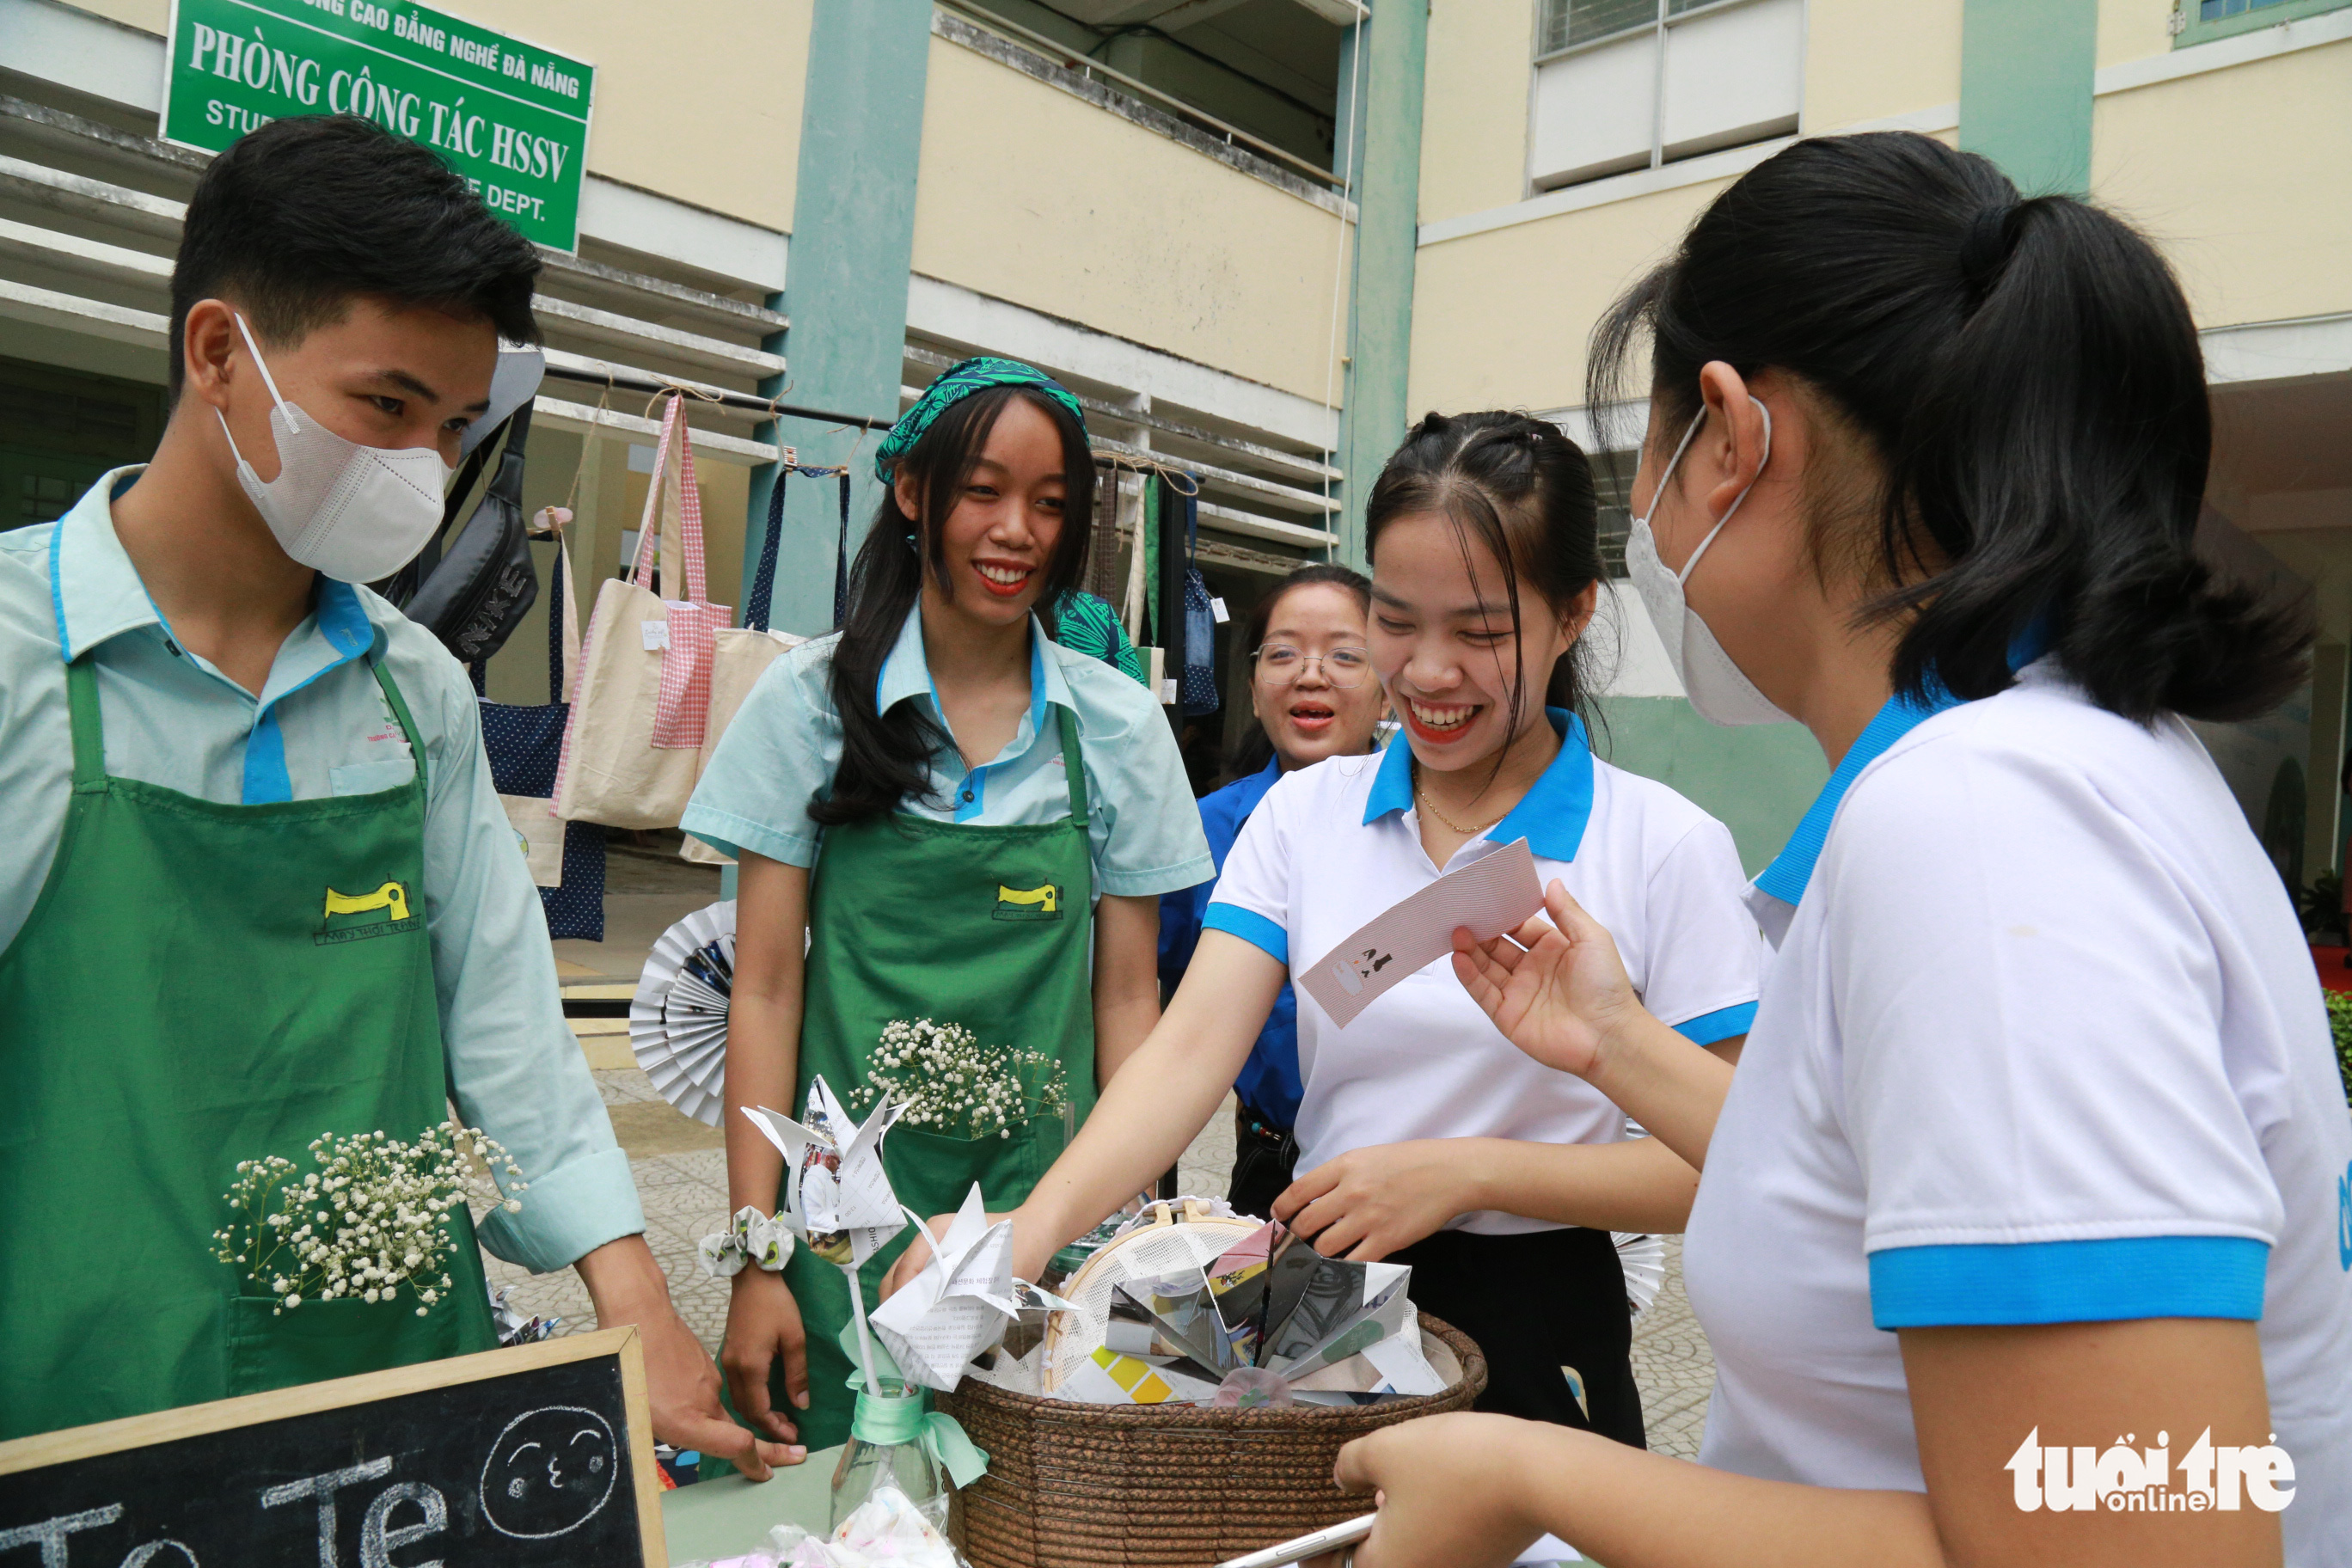 Students introduce handicrafts made from recyclable material at the event. Photo: Doan Nhan / Tuoi Tre